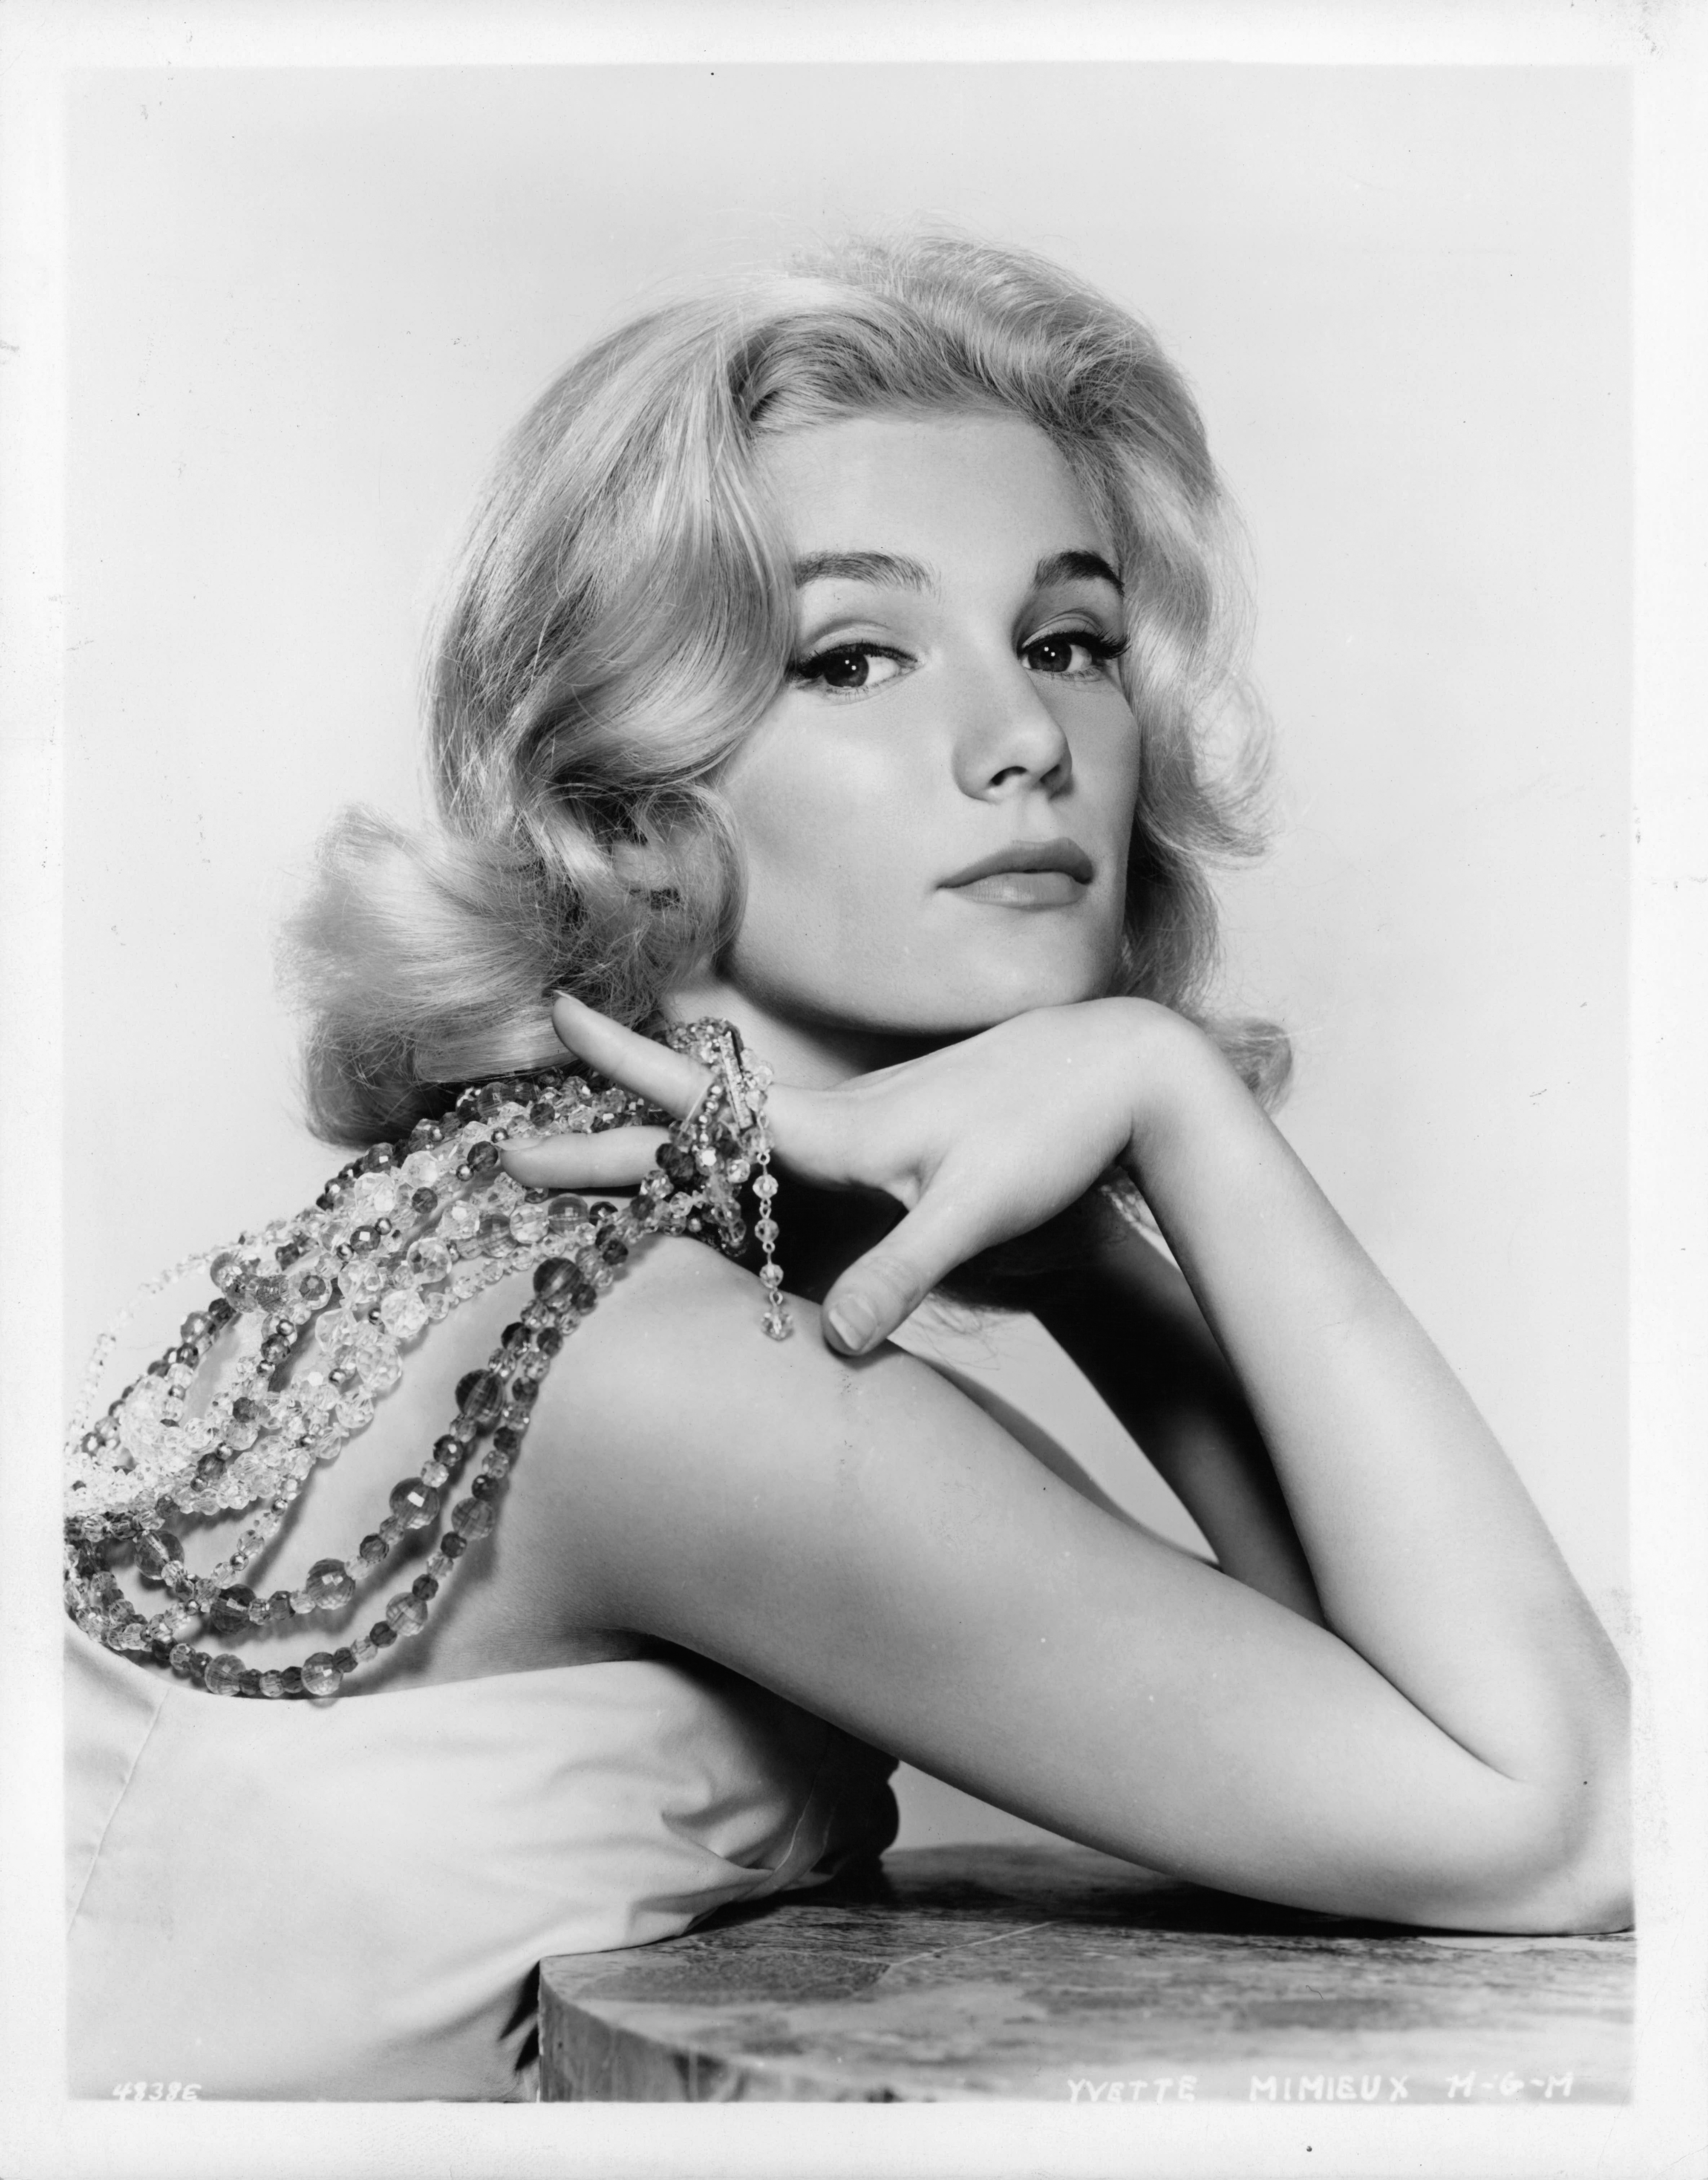 Yvette Mimieux, star of The Time Machine, The Black Hole, dies at 80. 